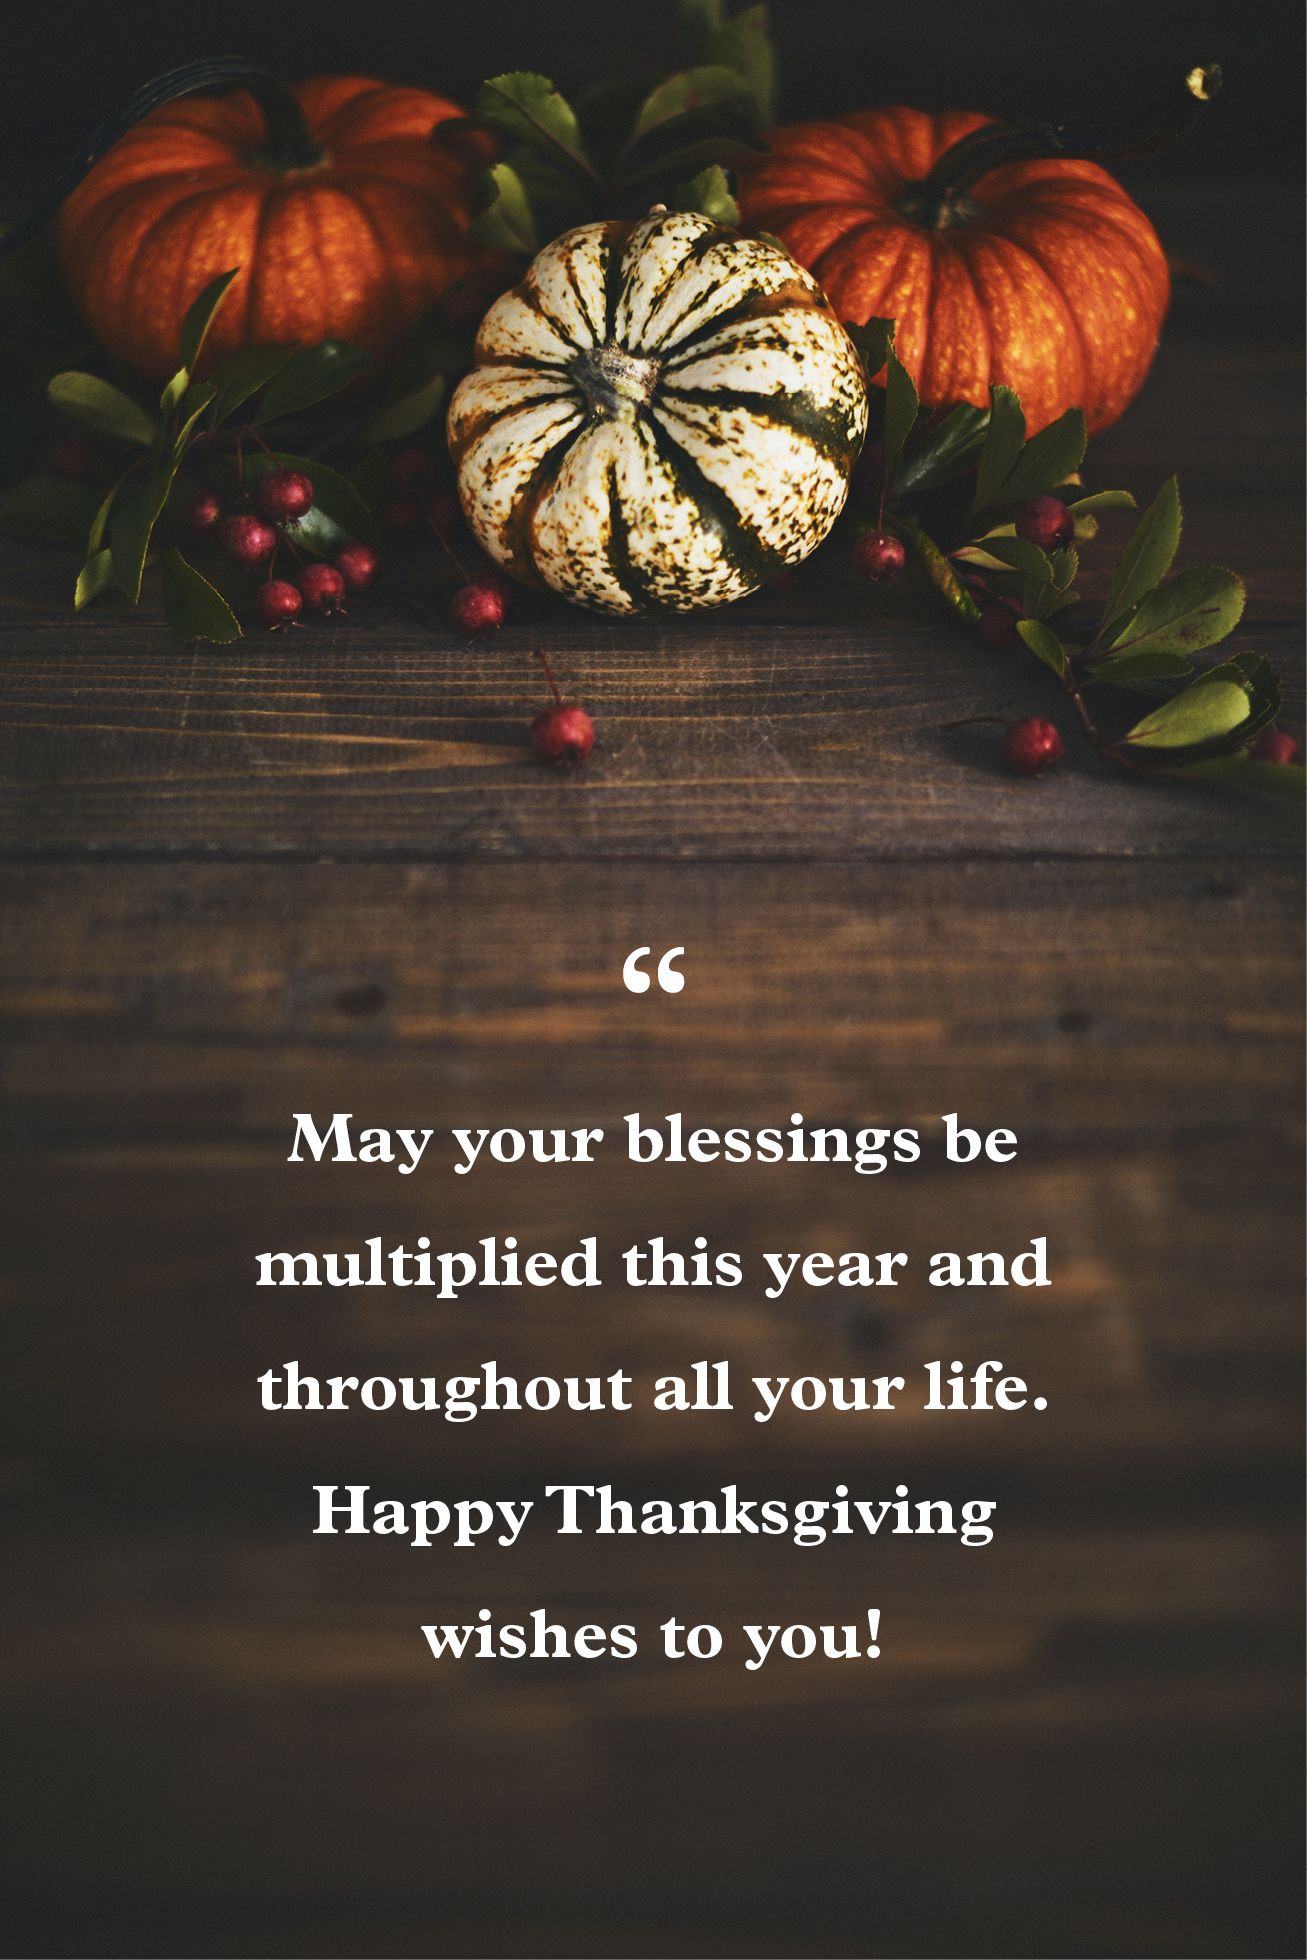 Wishing You a Happy Thanksgiving